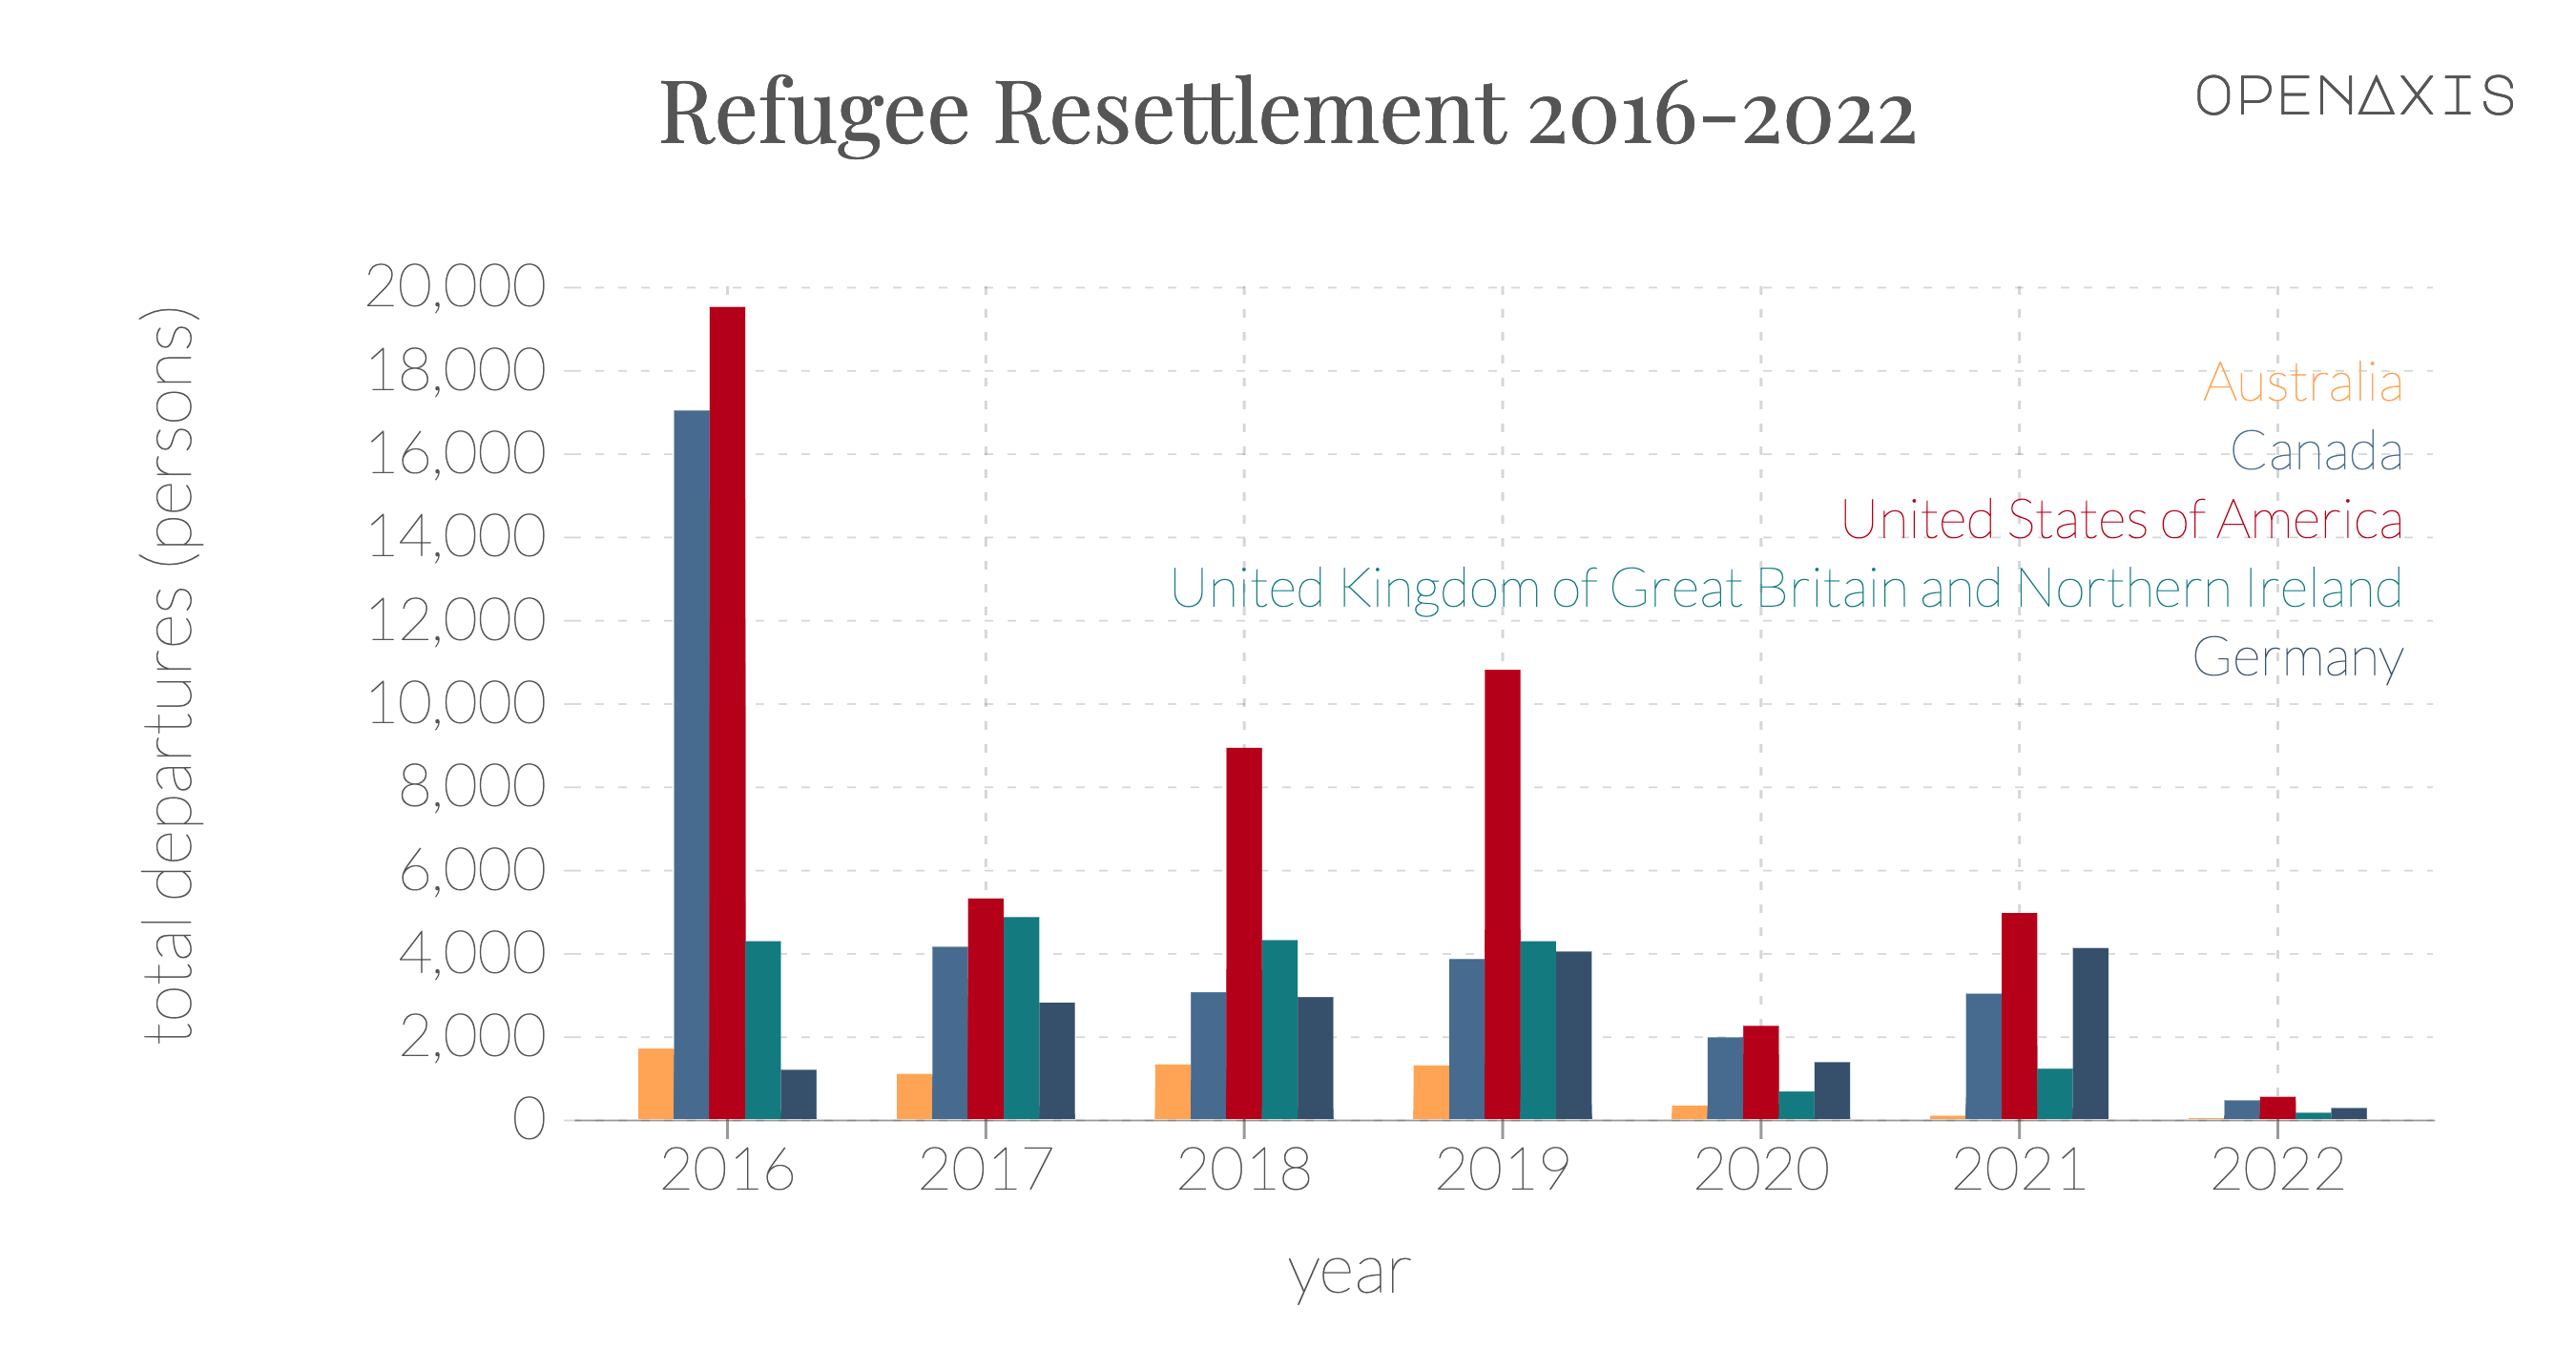 <p>Total refugee departures by country of resettlement from 2016 - 2022.</p><p><br /></p><p><span data-index="3" data-denotation-char data-id="0" data-value="&lt;a href=&quot;/search?q=%23Refugee&quot; target=_self&gt;#Refugee" data-link="/search?q=%23Refugee">﻿<span contenteditable="false"><span></span><a href="/search?q=%23Refugee" target="_self">#Refugee</a></span>﻿</span> </p>